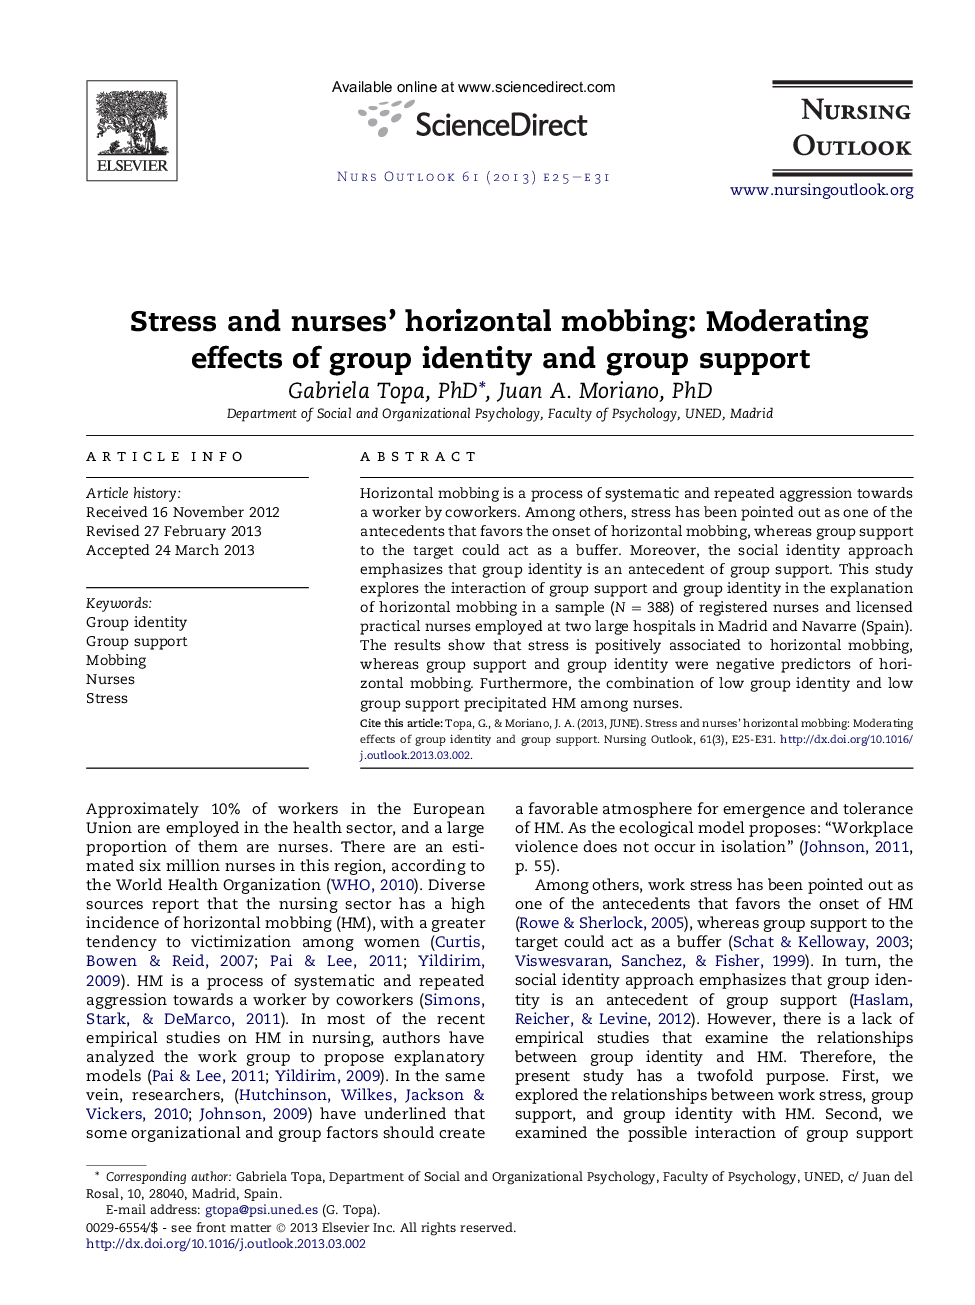 Stress and nurses' horizontal mobbing: Moderating effects of group identity and group support